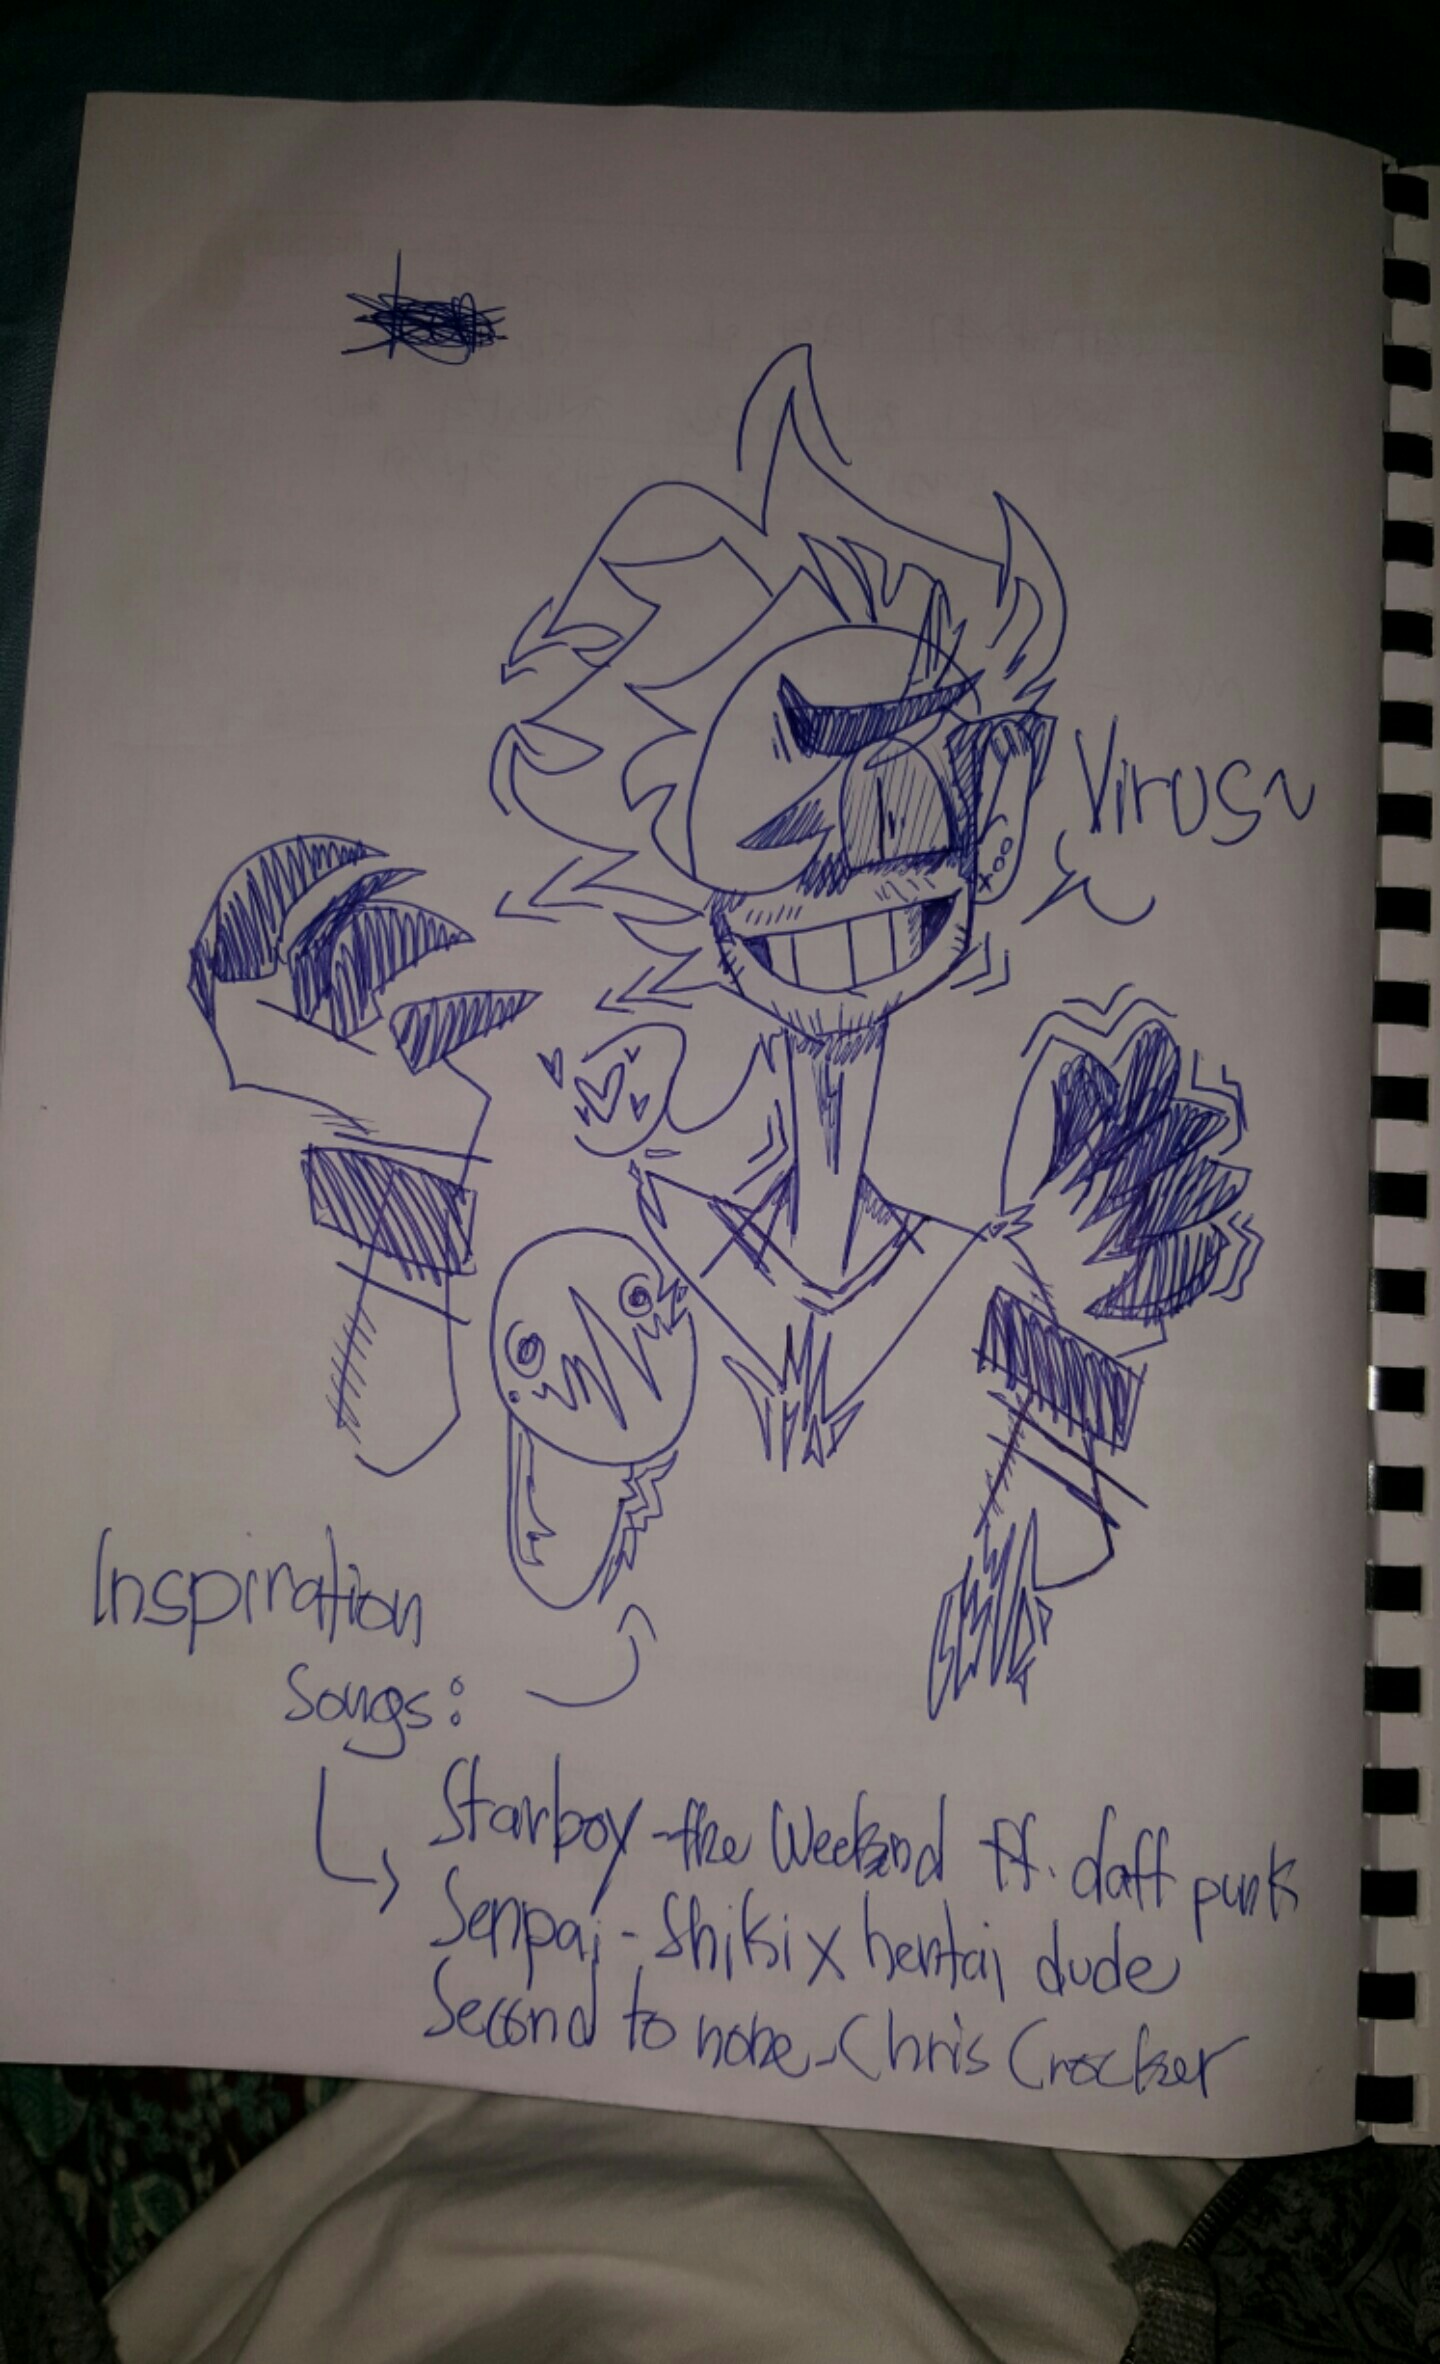 -soooo I did a thing and it's virus! my anti version of goop! also there's some songs that reminds me of virus and it's on the paper!